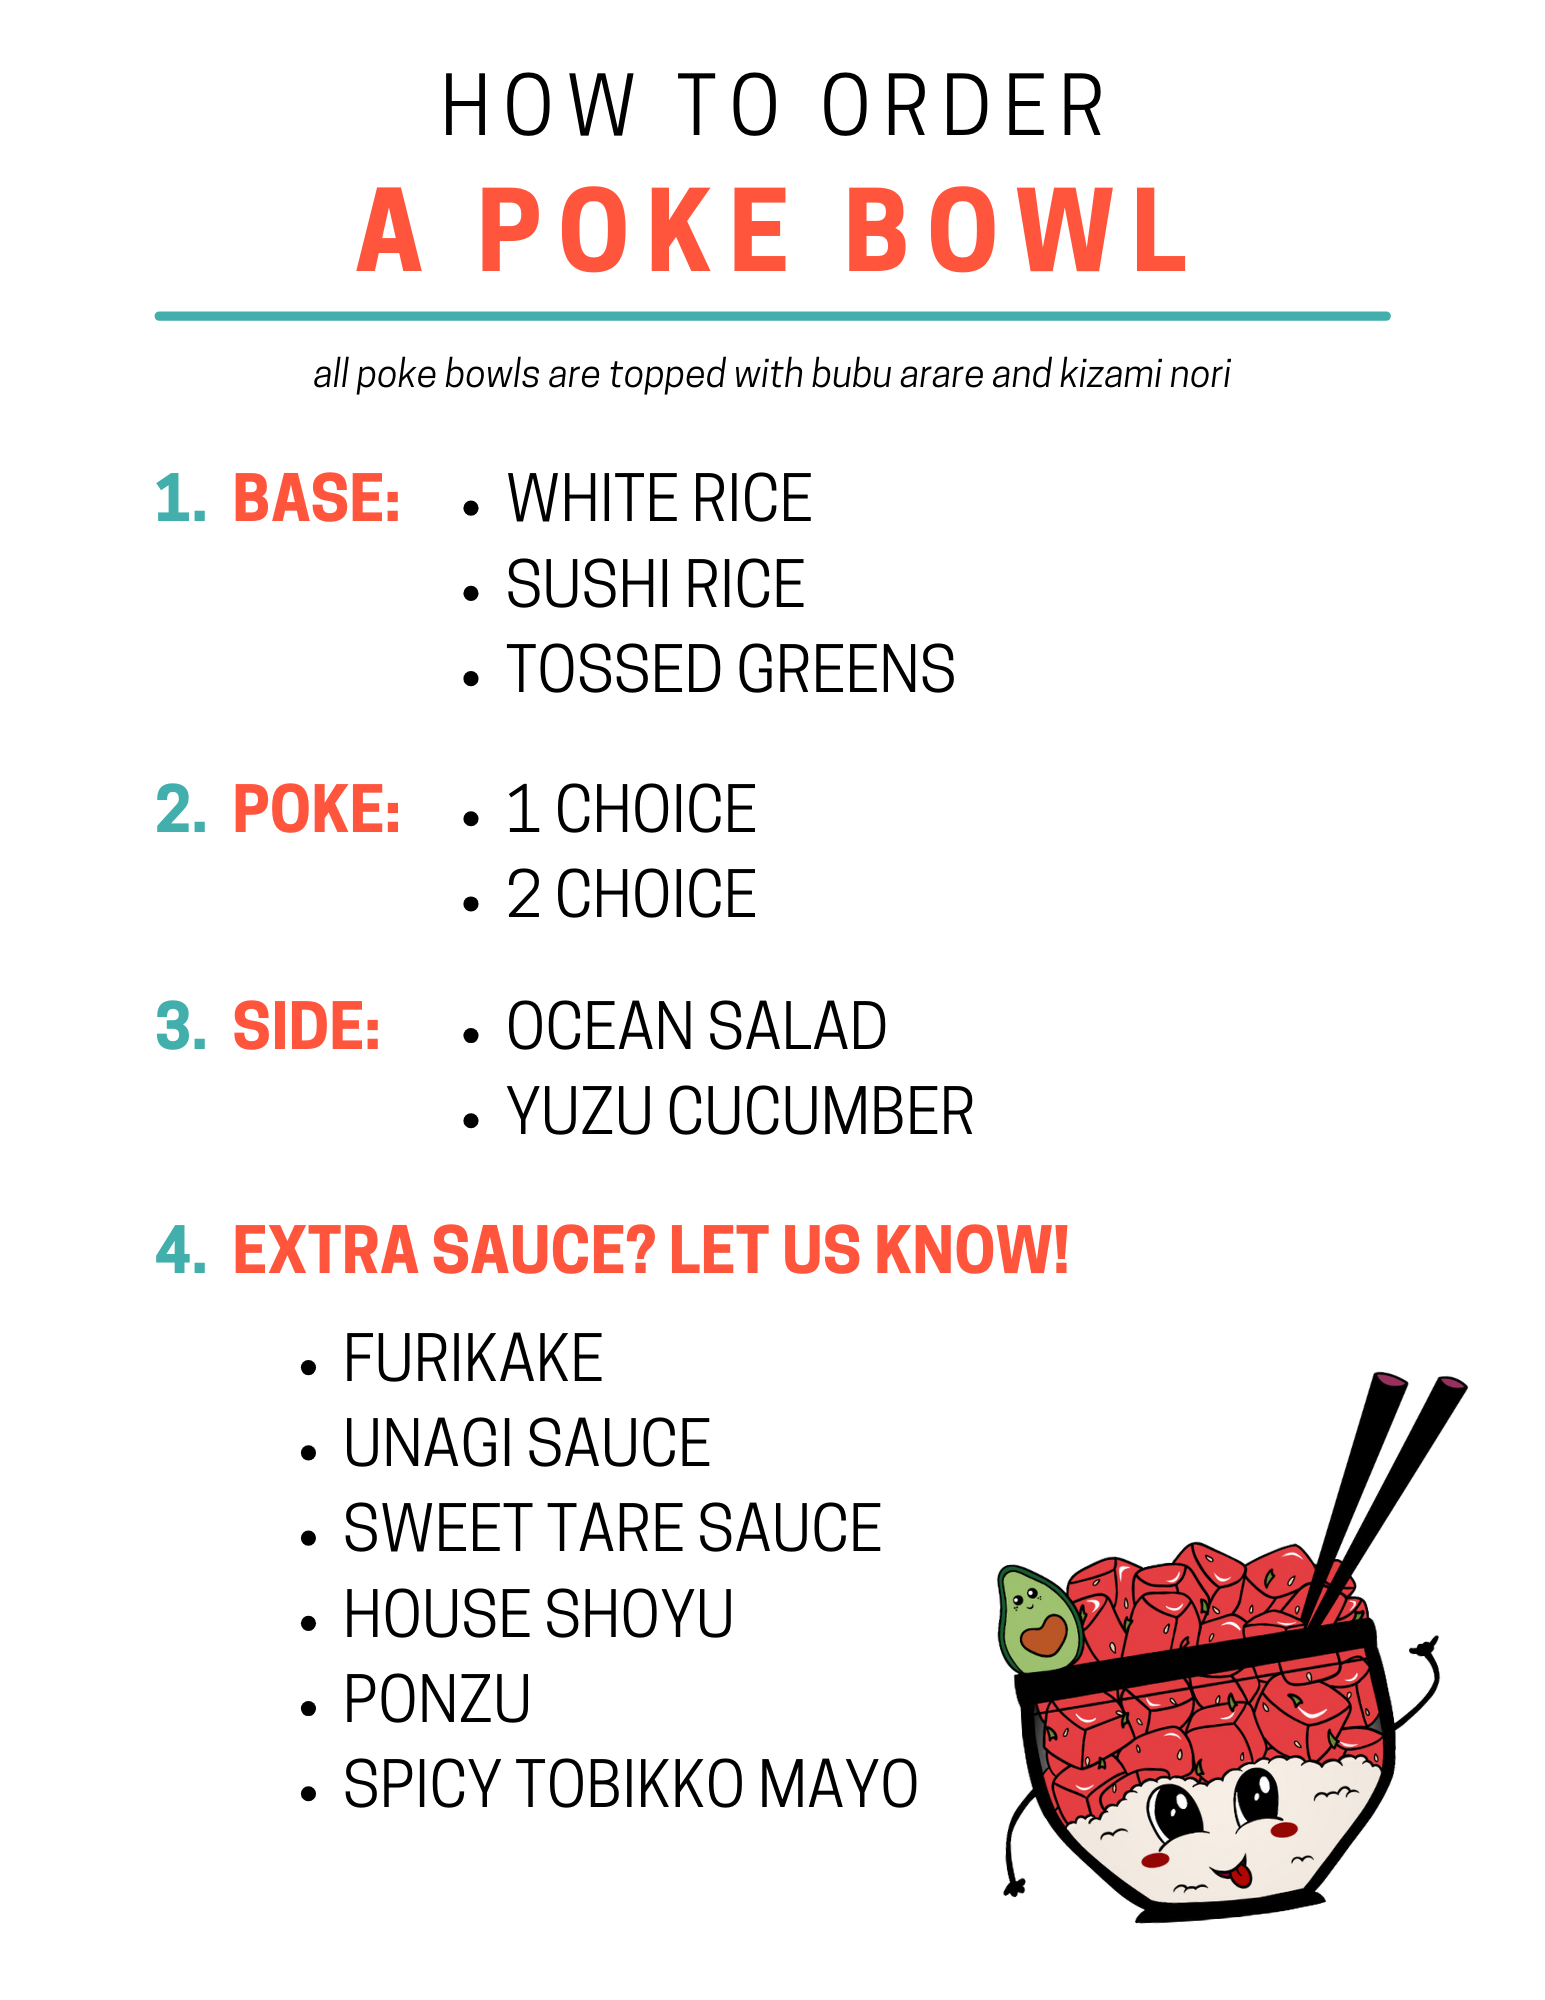 HOW TO ORDER A POKE BOWL!.png